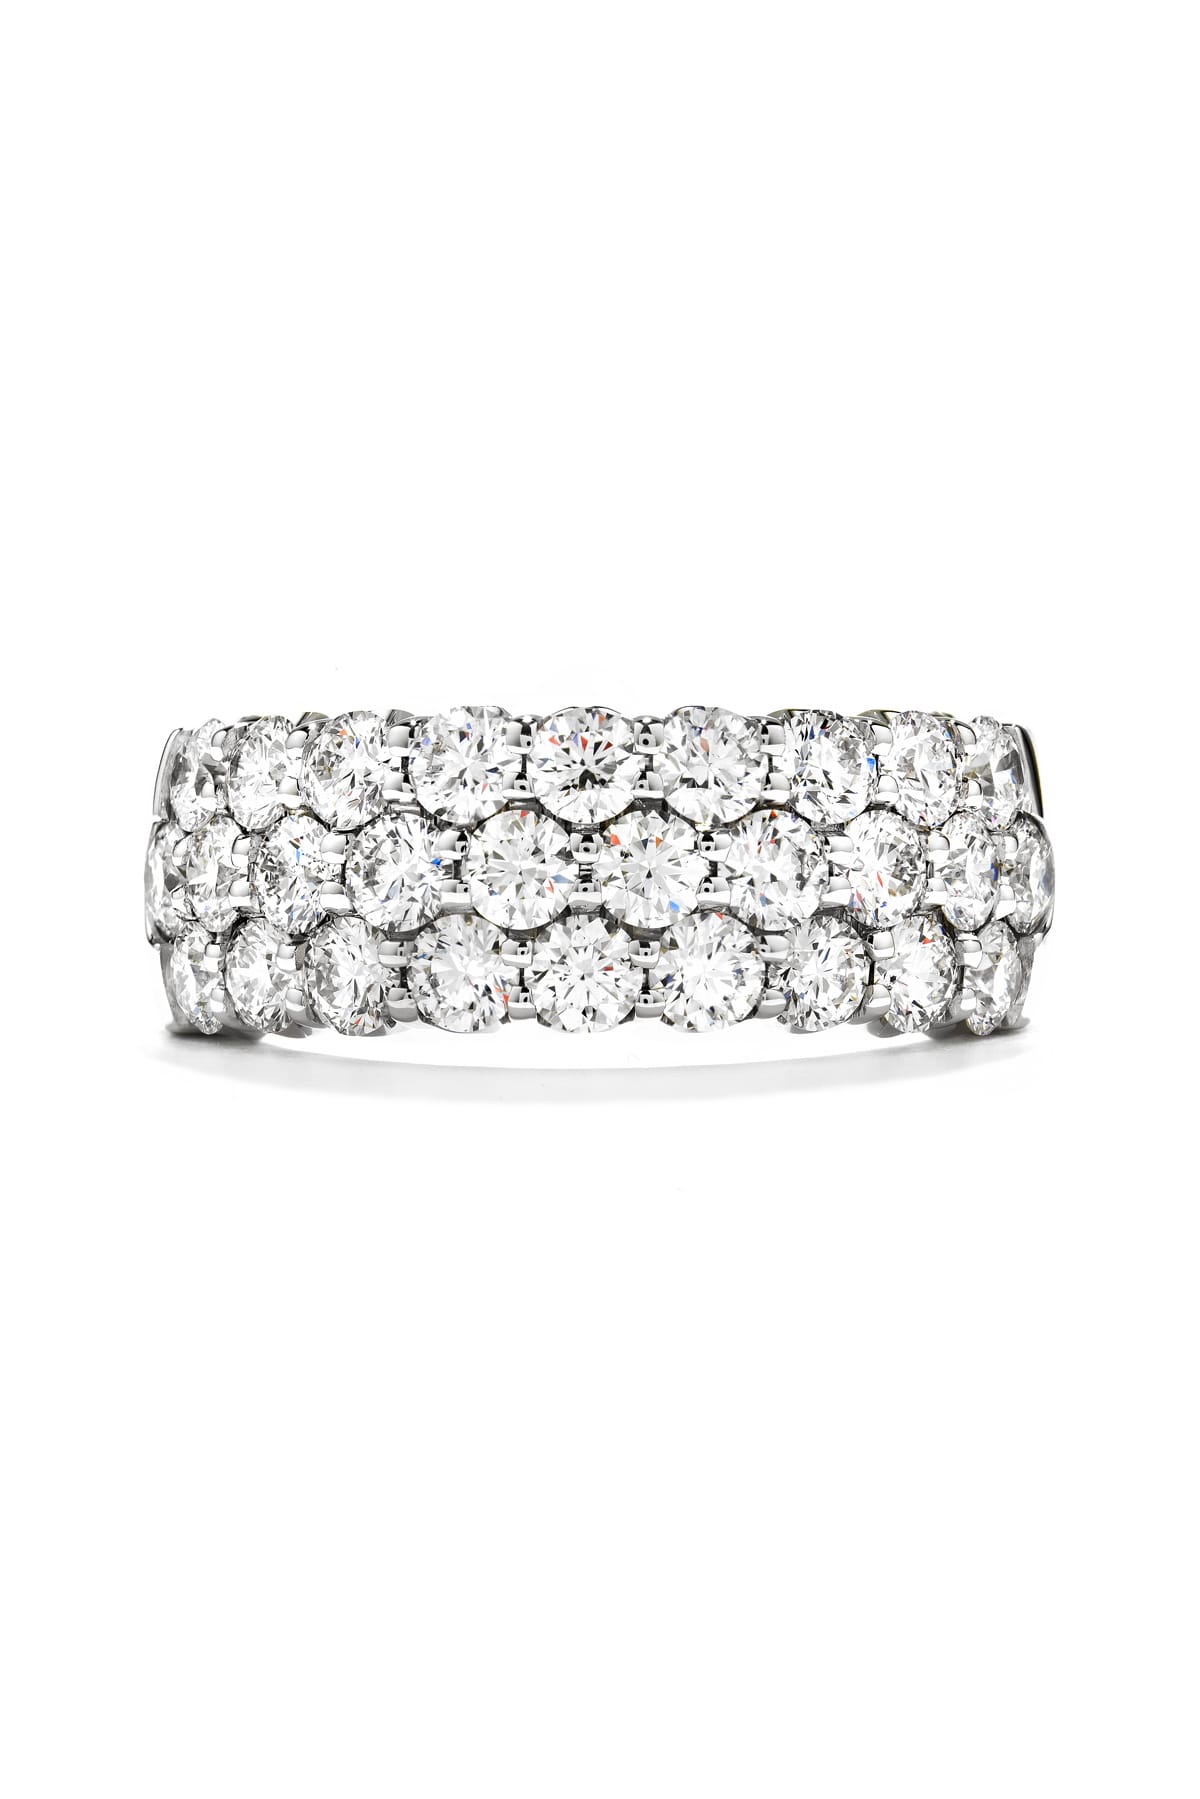 Truly Triple Row Right Hand Ring From Hearts On Fire available at LeGassick Diamonds and Jewellery Gold Coast, Australia.